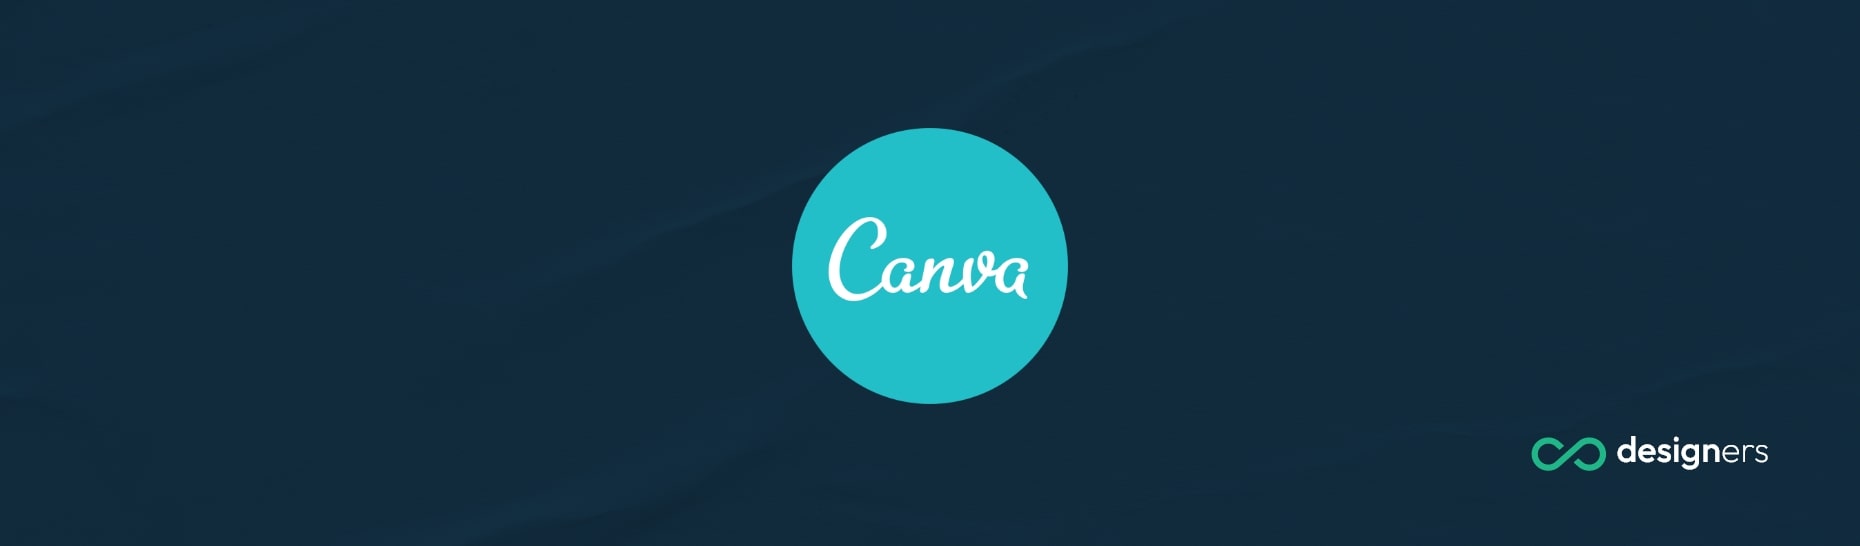 How Do You Make a Folded Booklet in Canva?